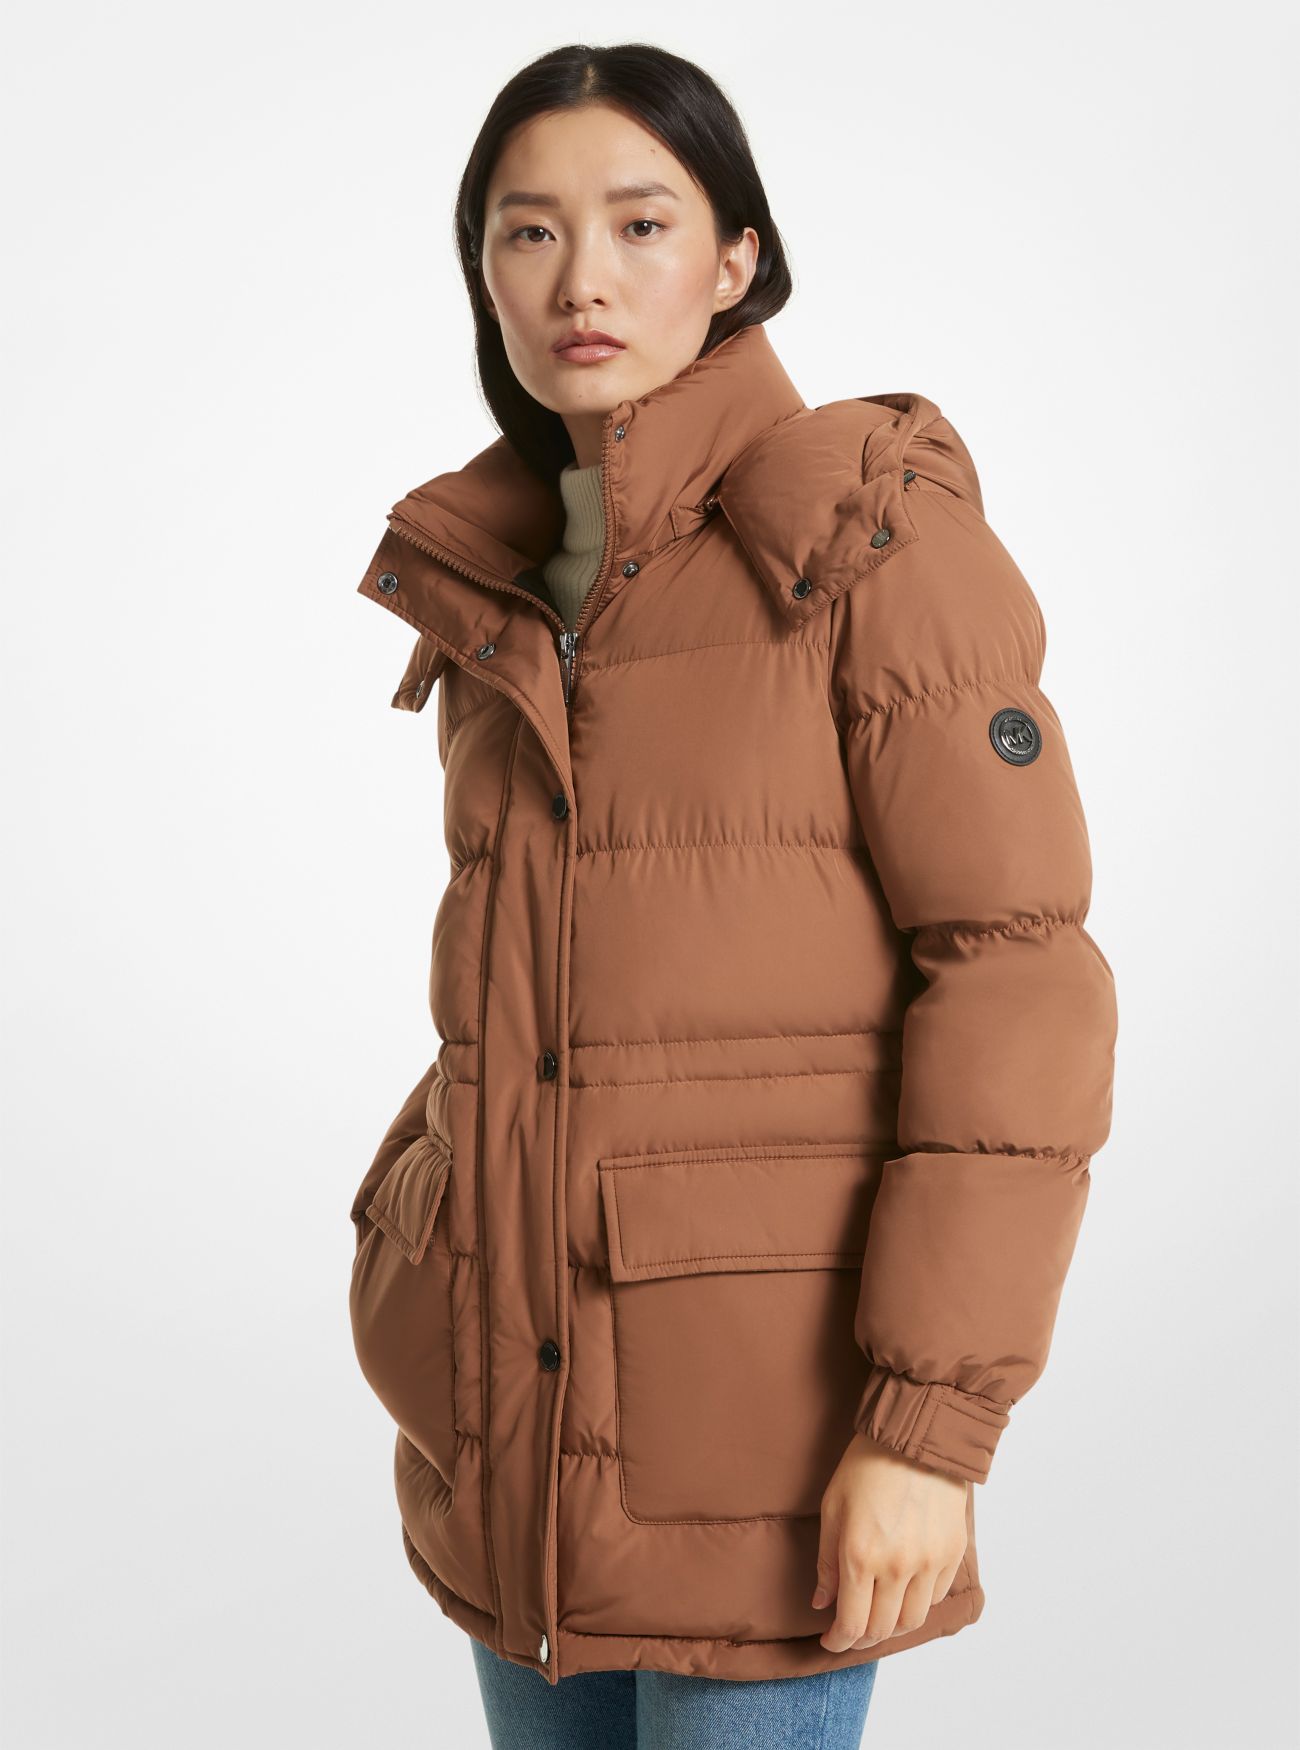 MK Quilted Puffer Jacket - Brown - Michael Kors